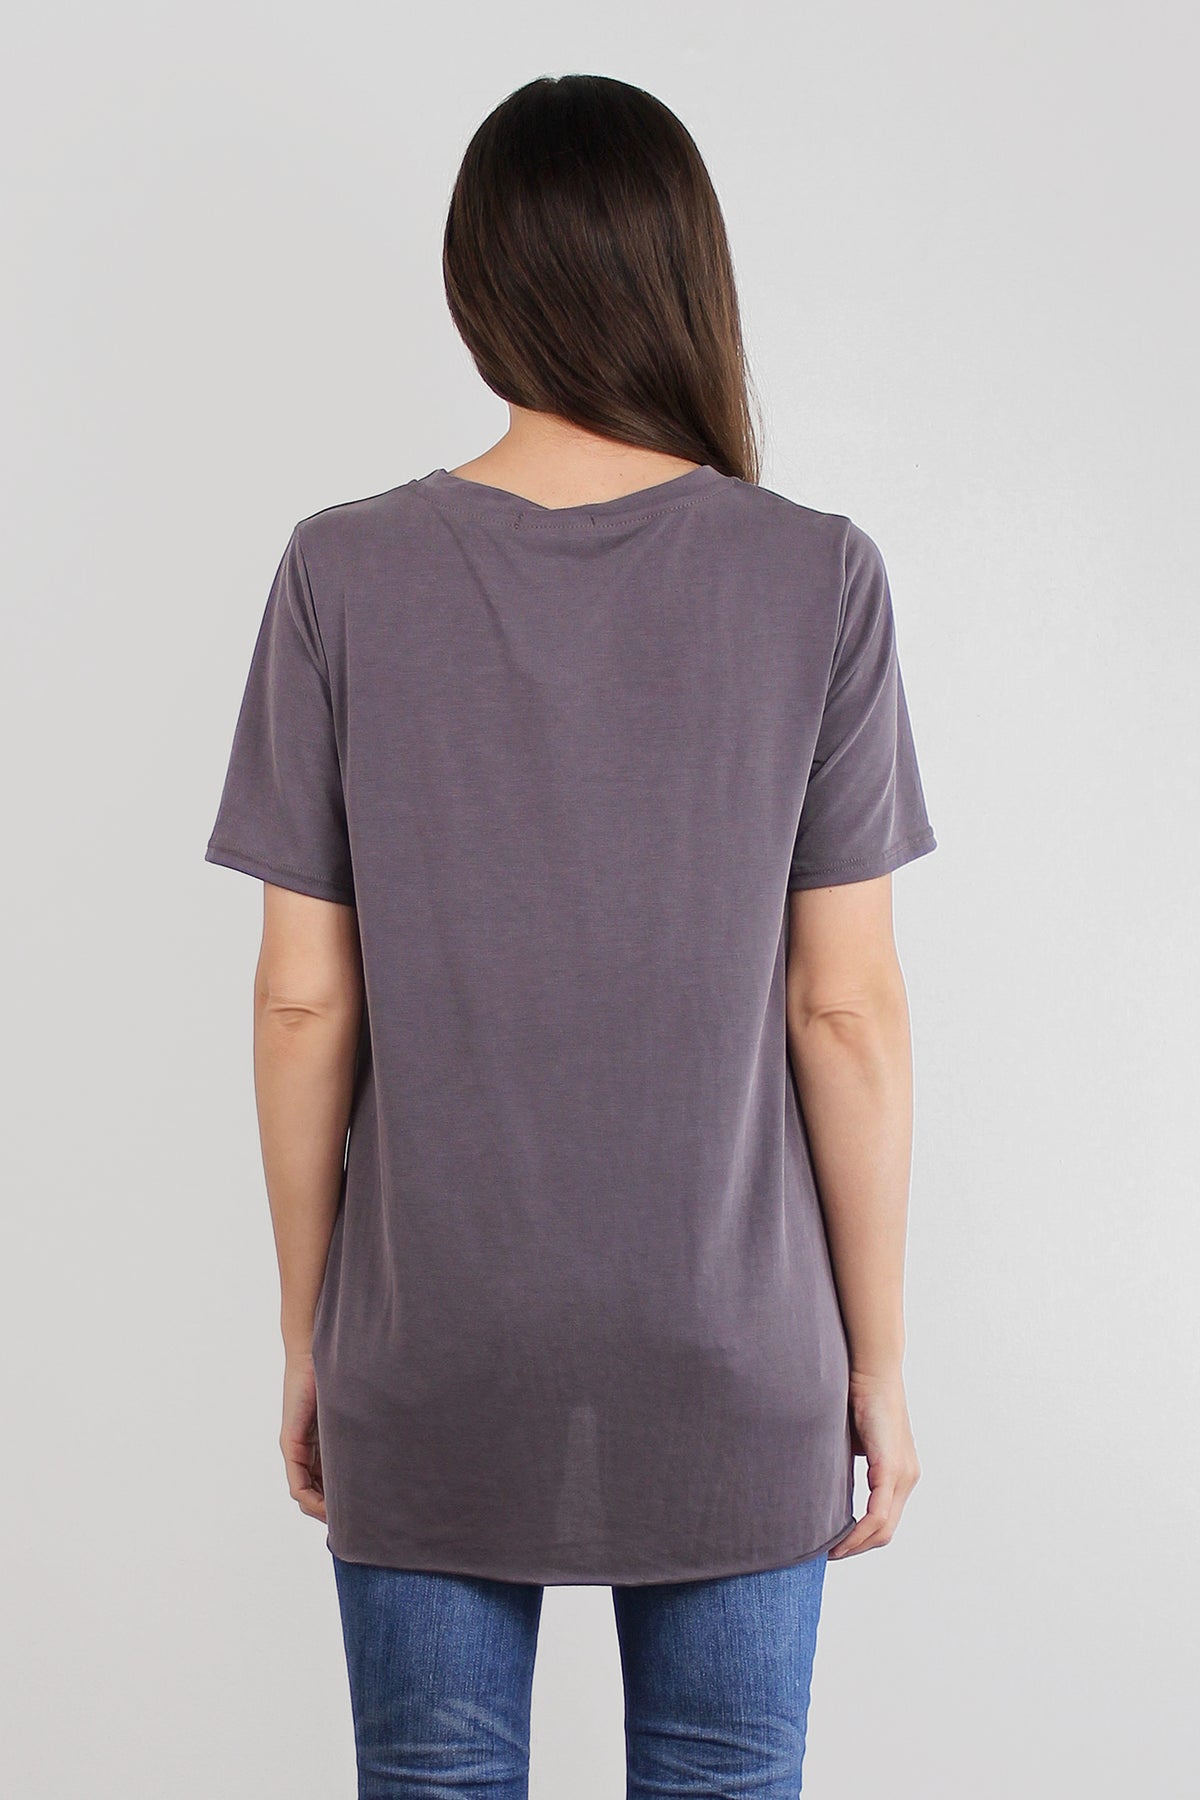 Knot front tee shirt, in dusty plum. Image 2